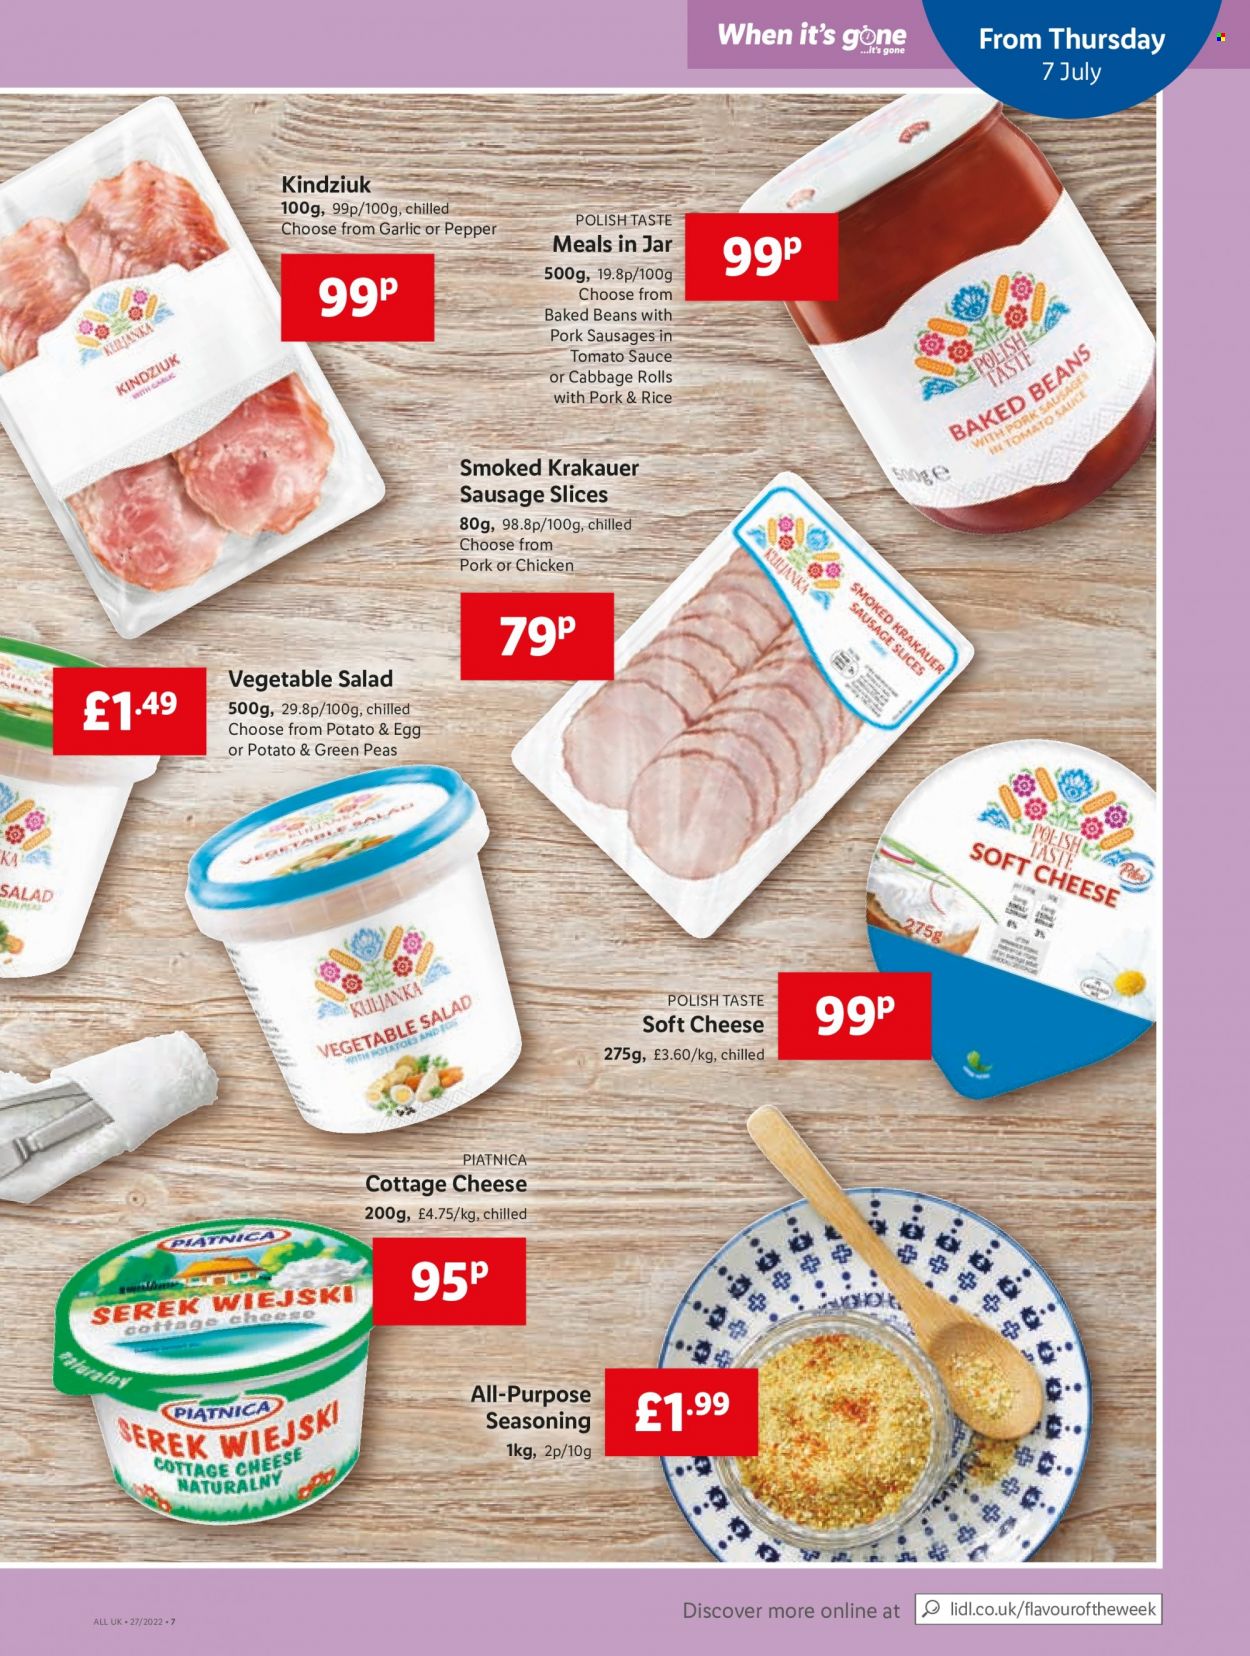 thumbnail - Lidl offer  - 07/07/2022 - 13/07/2022 - Sales products - beans, cabbage, garlic, peas, salad, sausage, sausage slices, cottage cheese, soft cheese, cheese, eggs, baked beans, rice, spice, polish. Page 5.